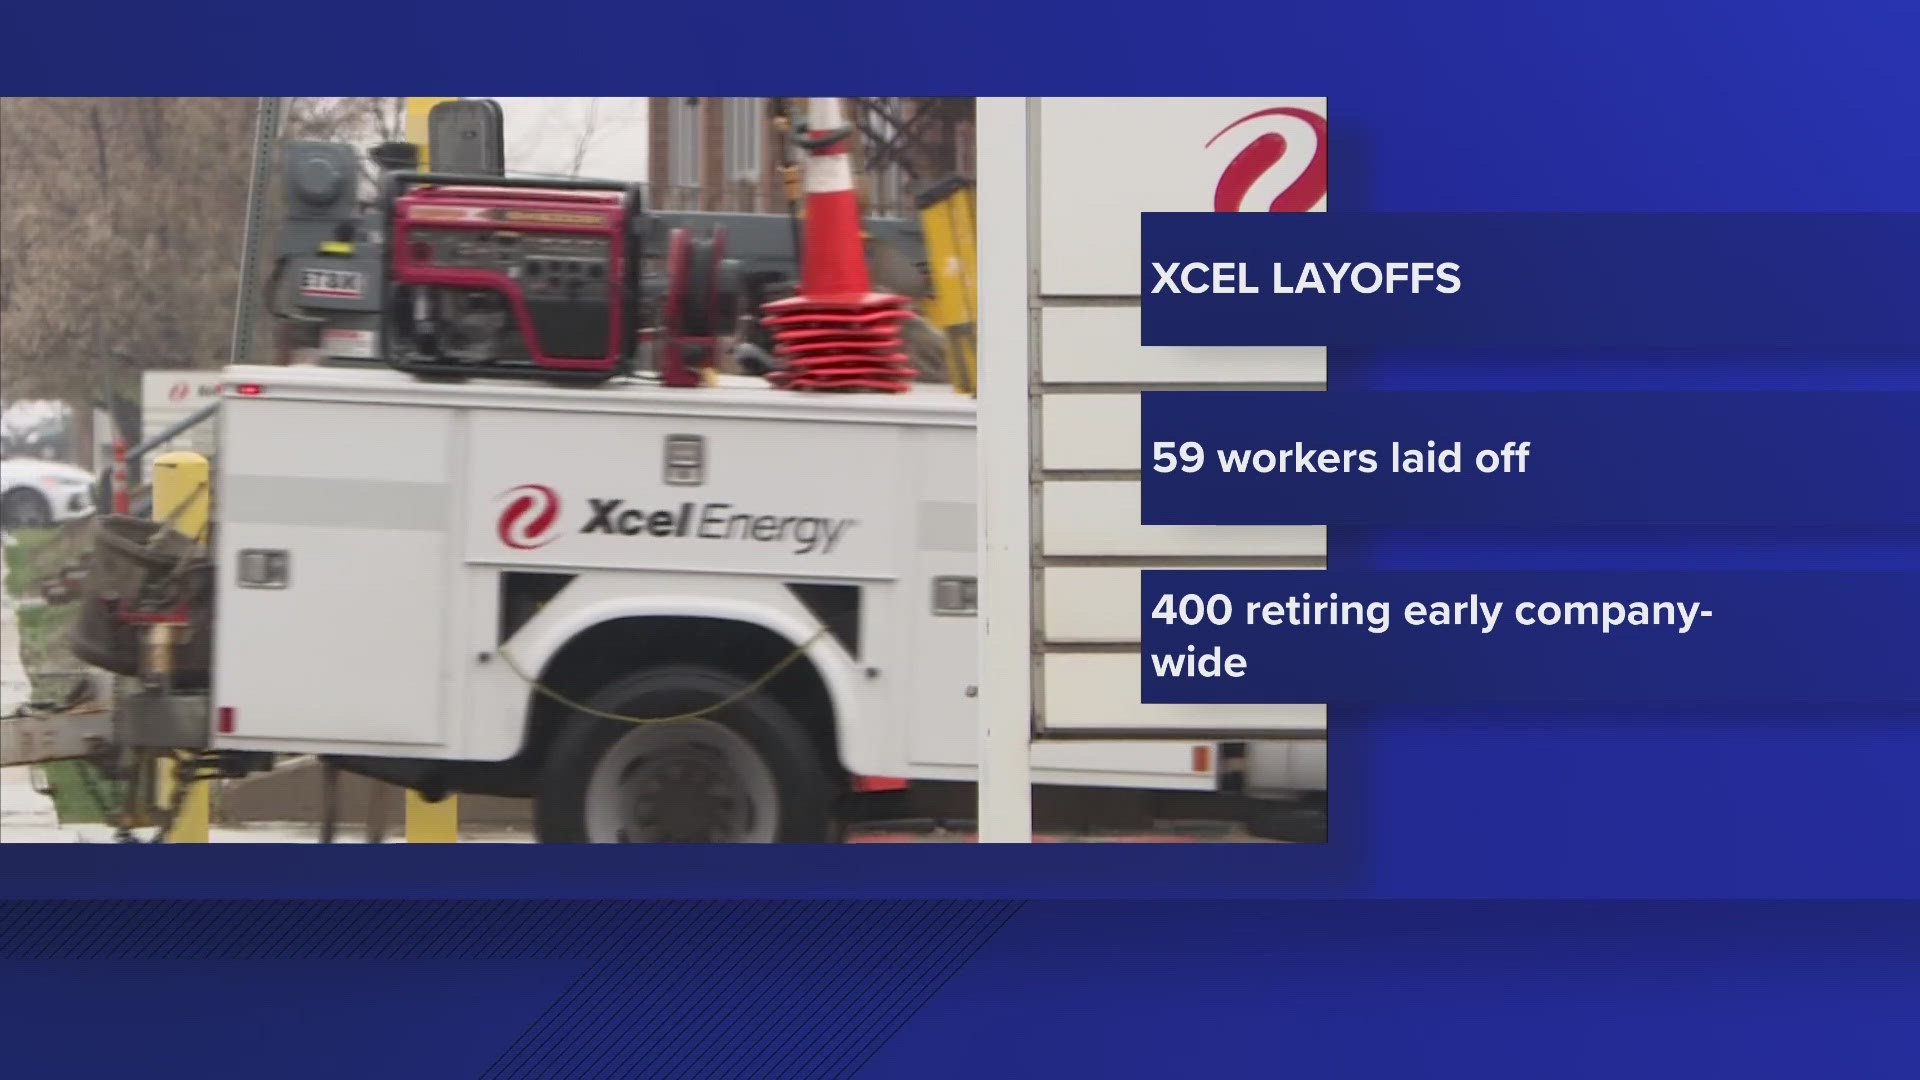 The utility provider said hundreds of employees company-wide accepted early retirement offers.